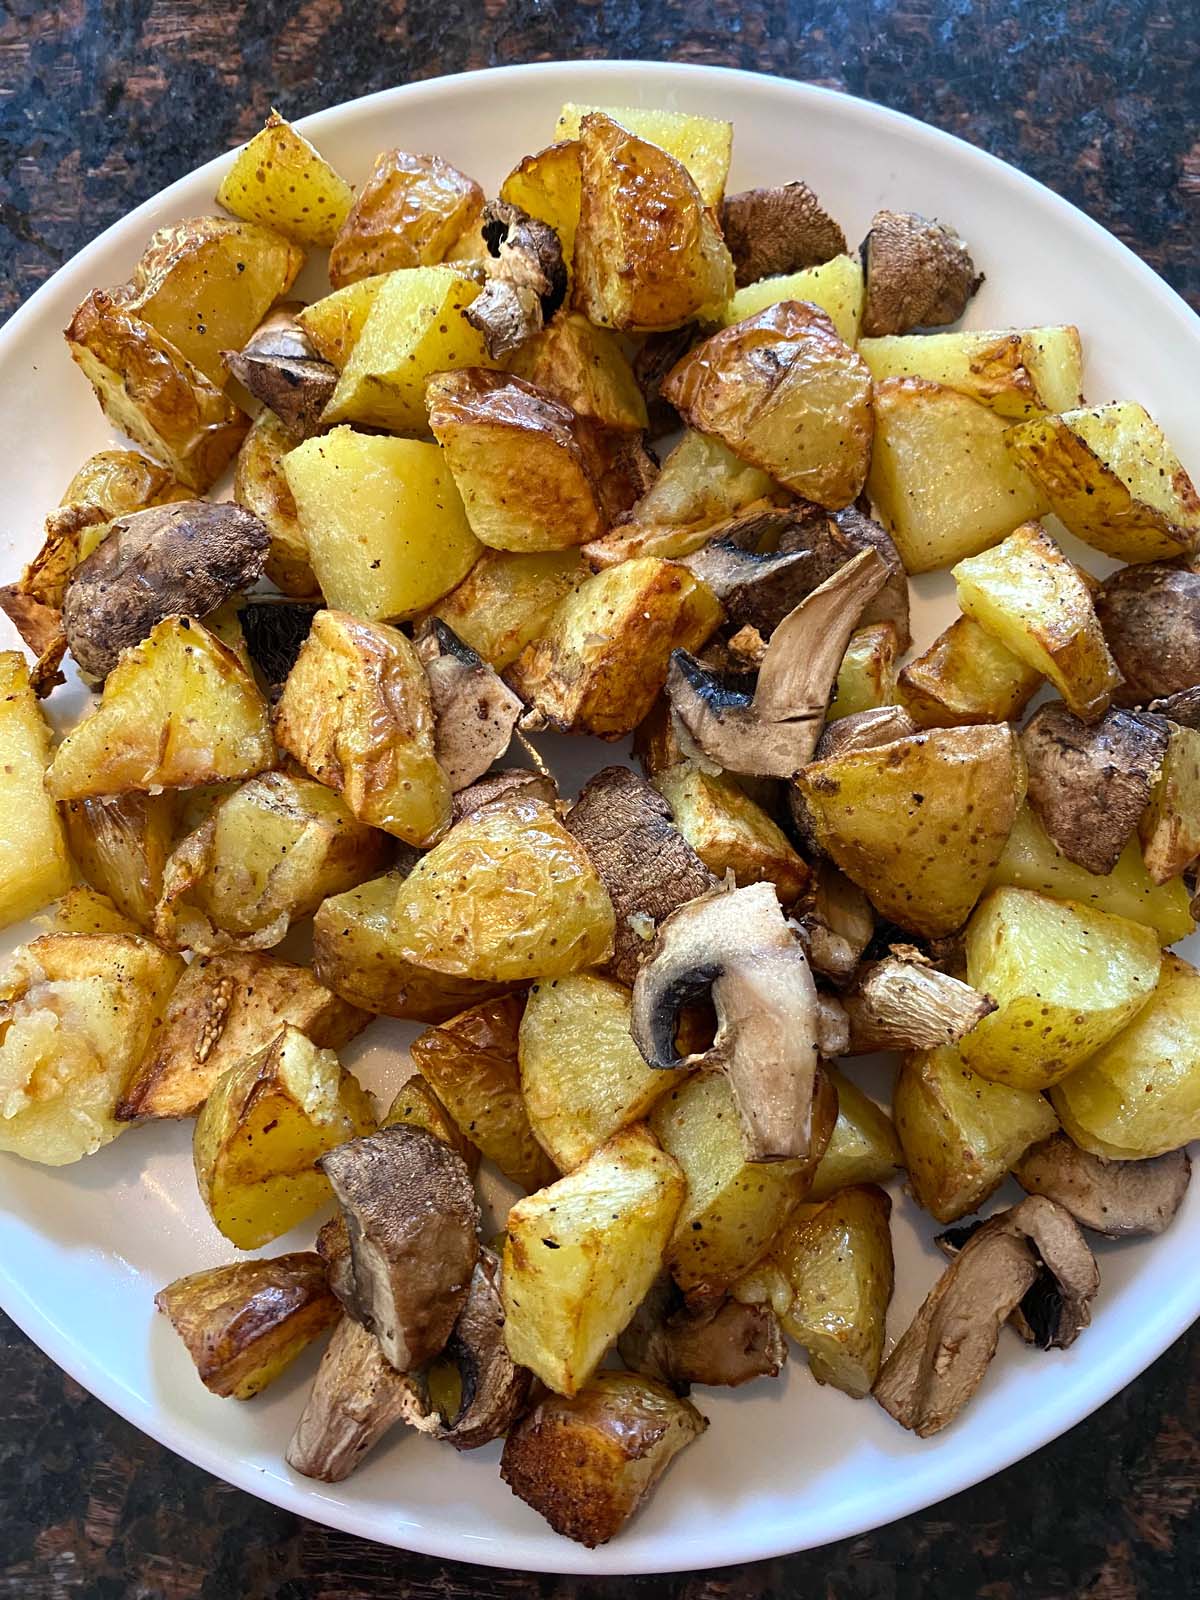 Cooked potatoes and mushrooms on a white plate.